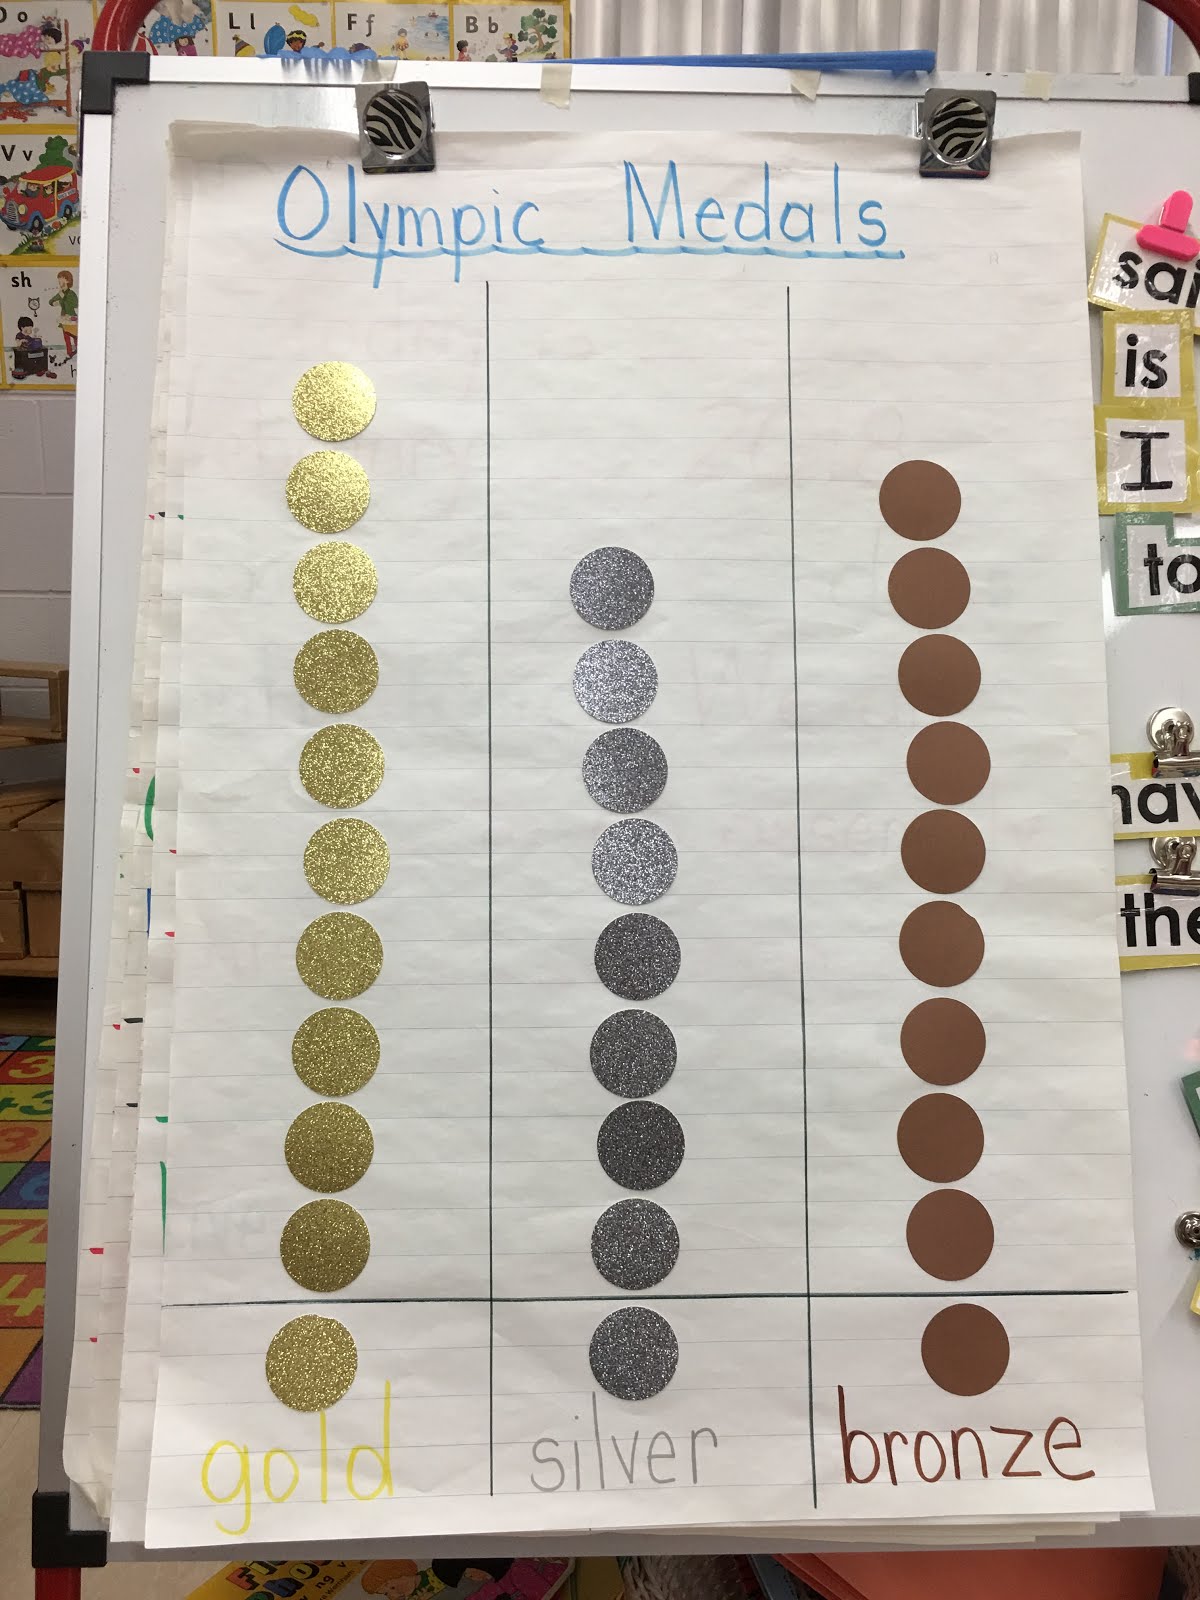 Our Medal Graph continues to grow